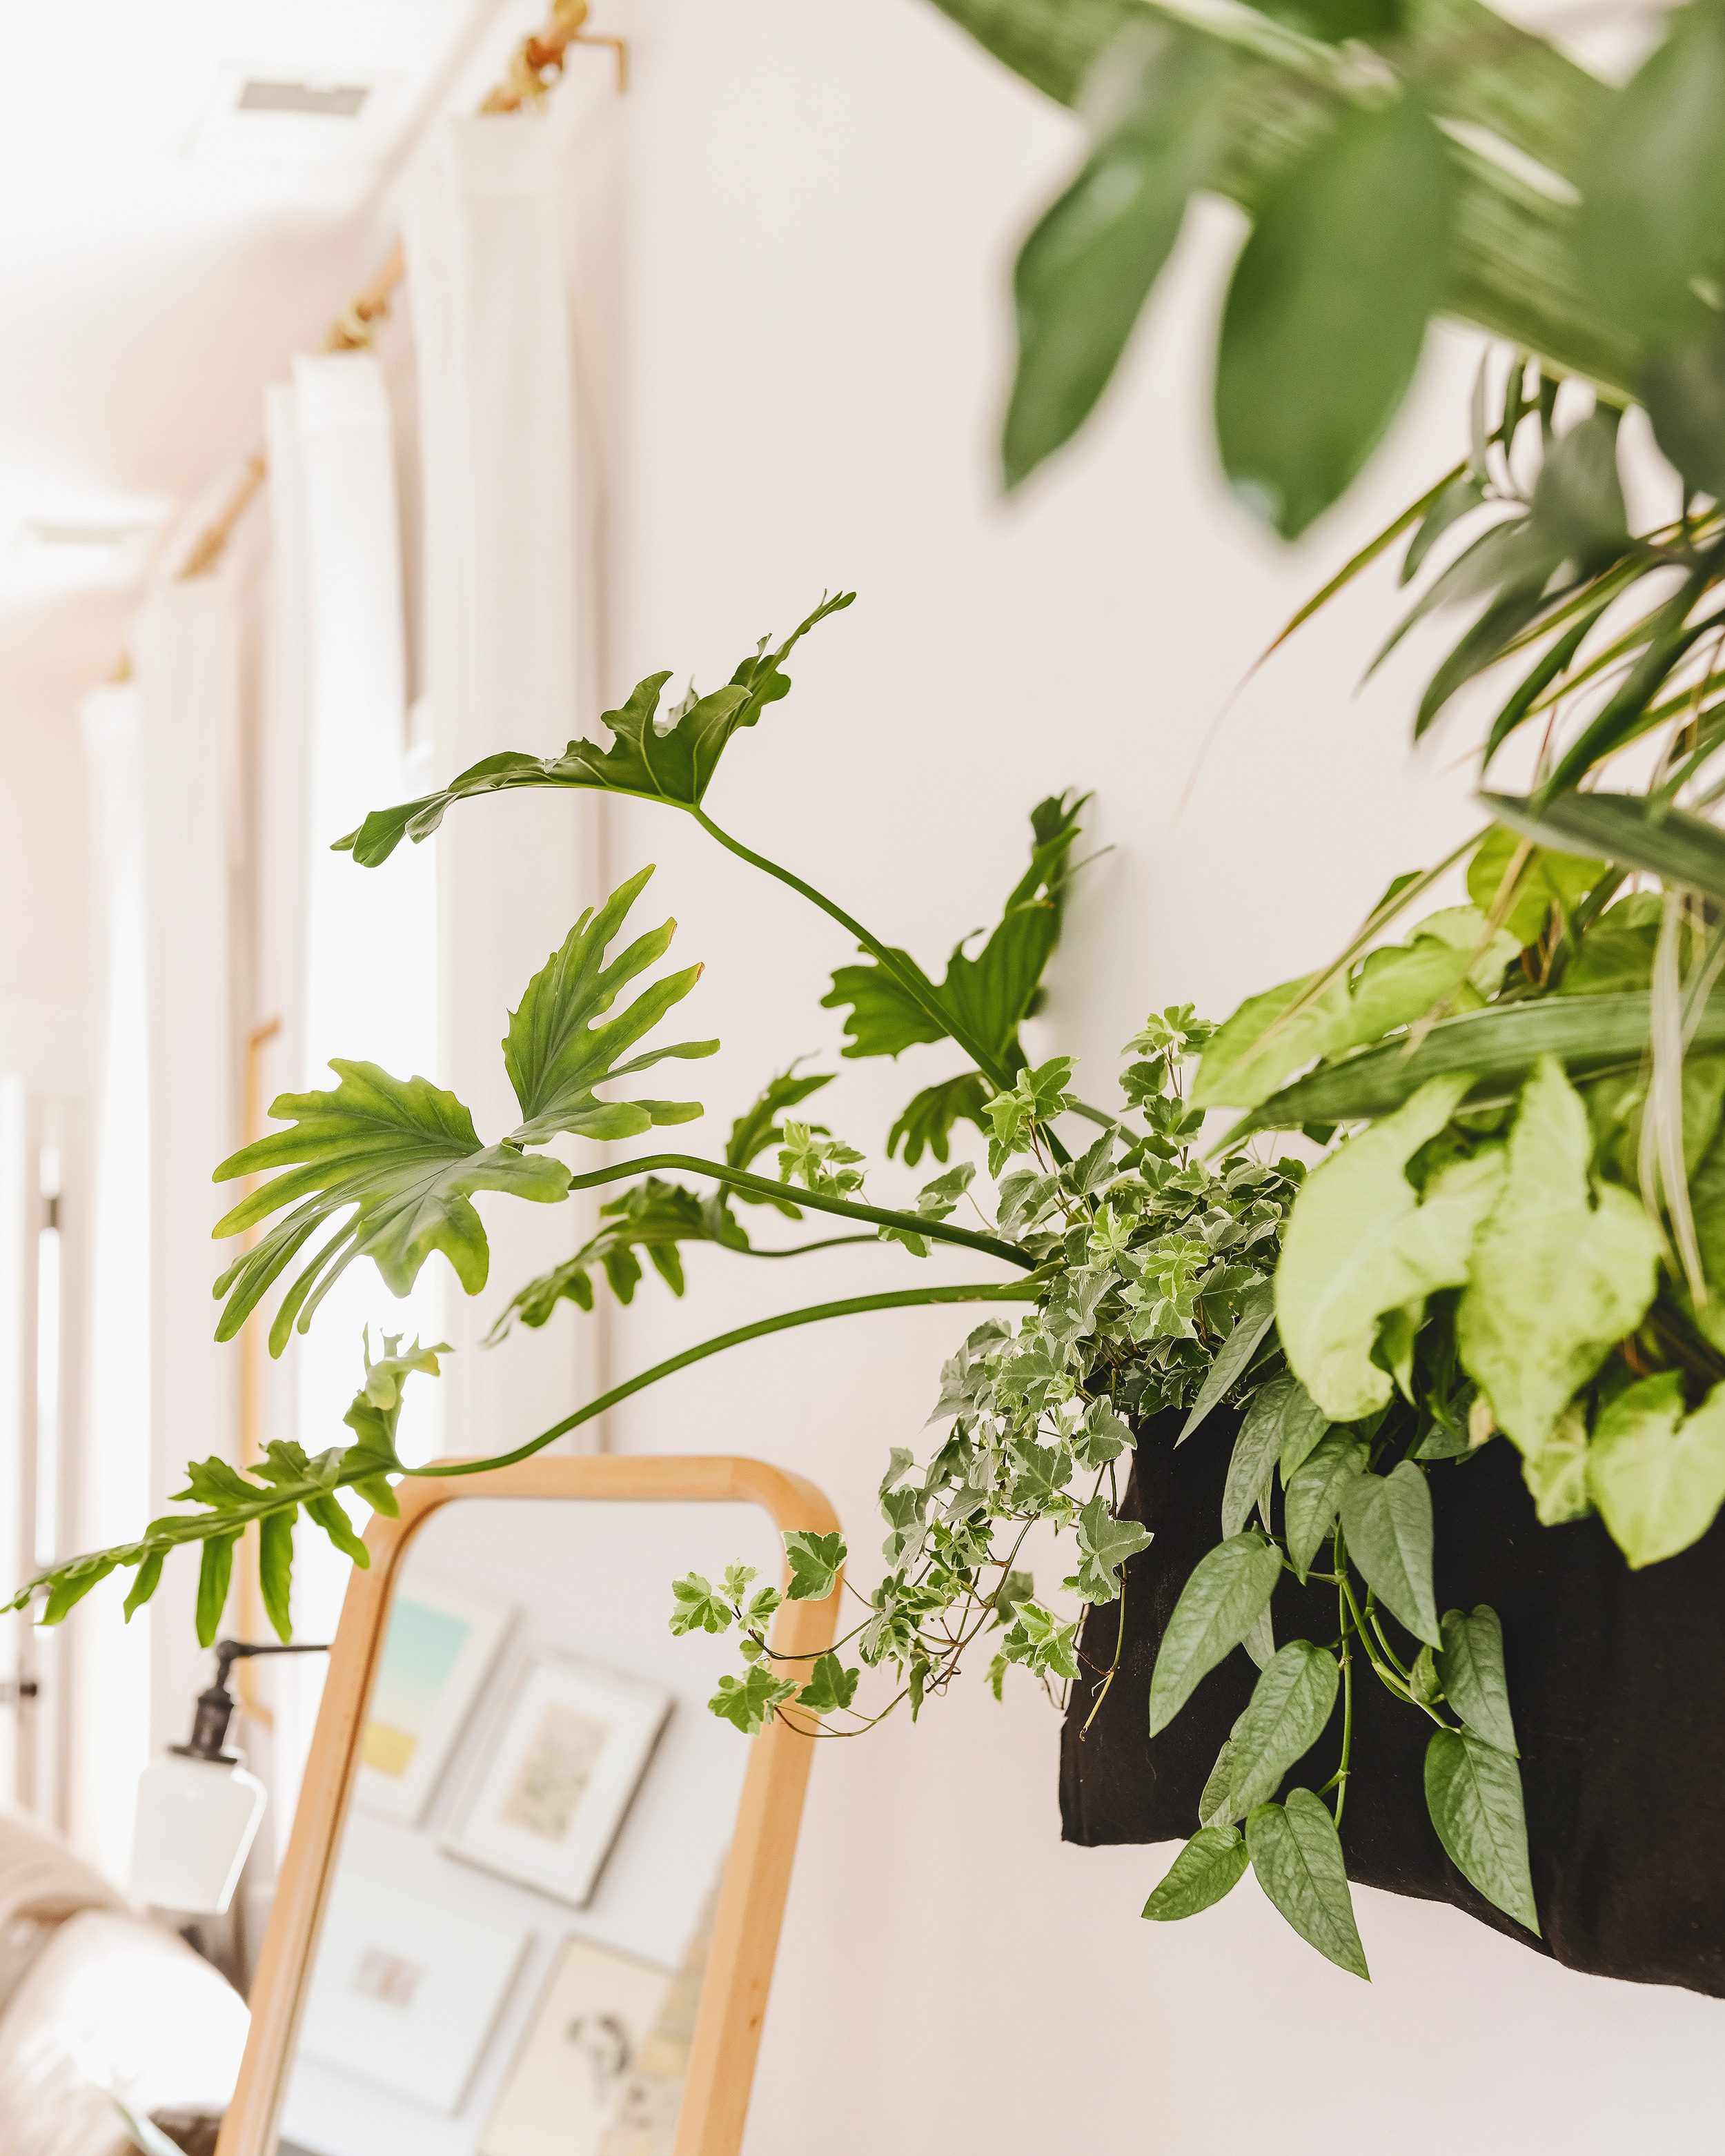 Close-up of the living wall planter in our living room | How We Care for Houseplants via Yellow Brick Home #houseplants